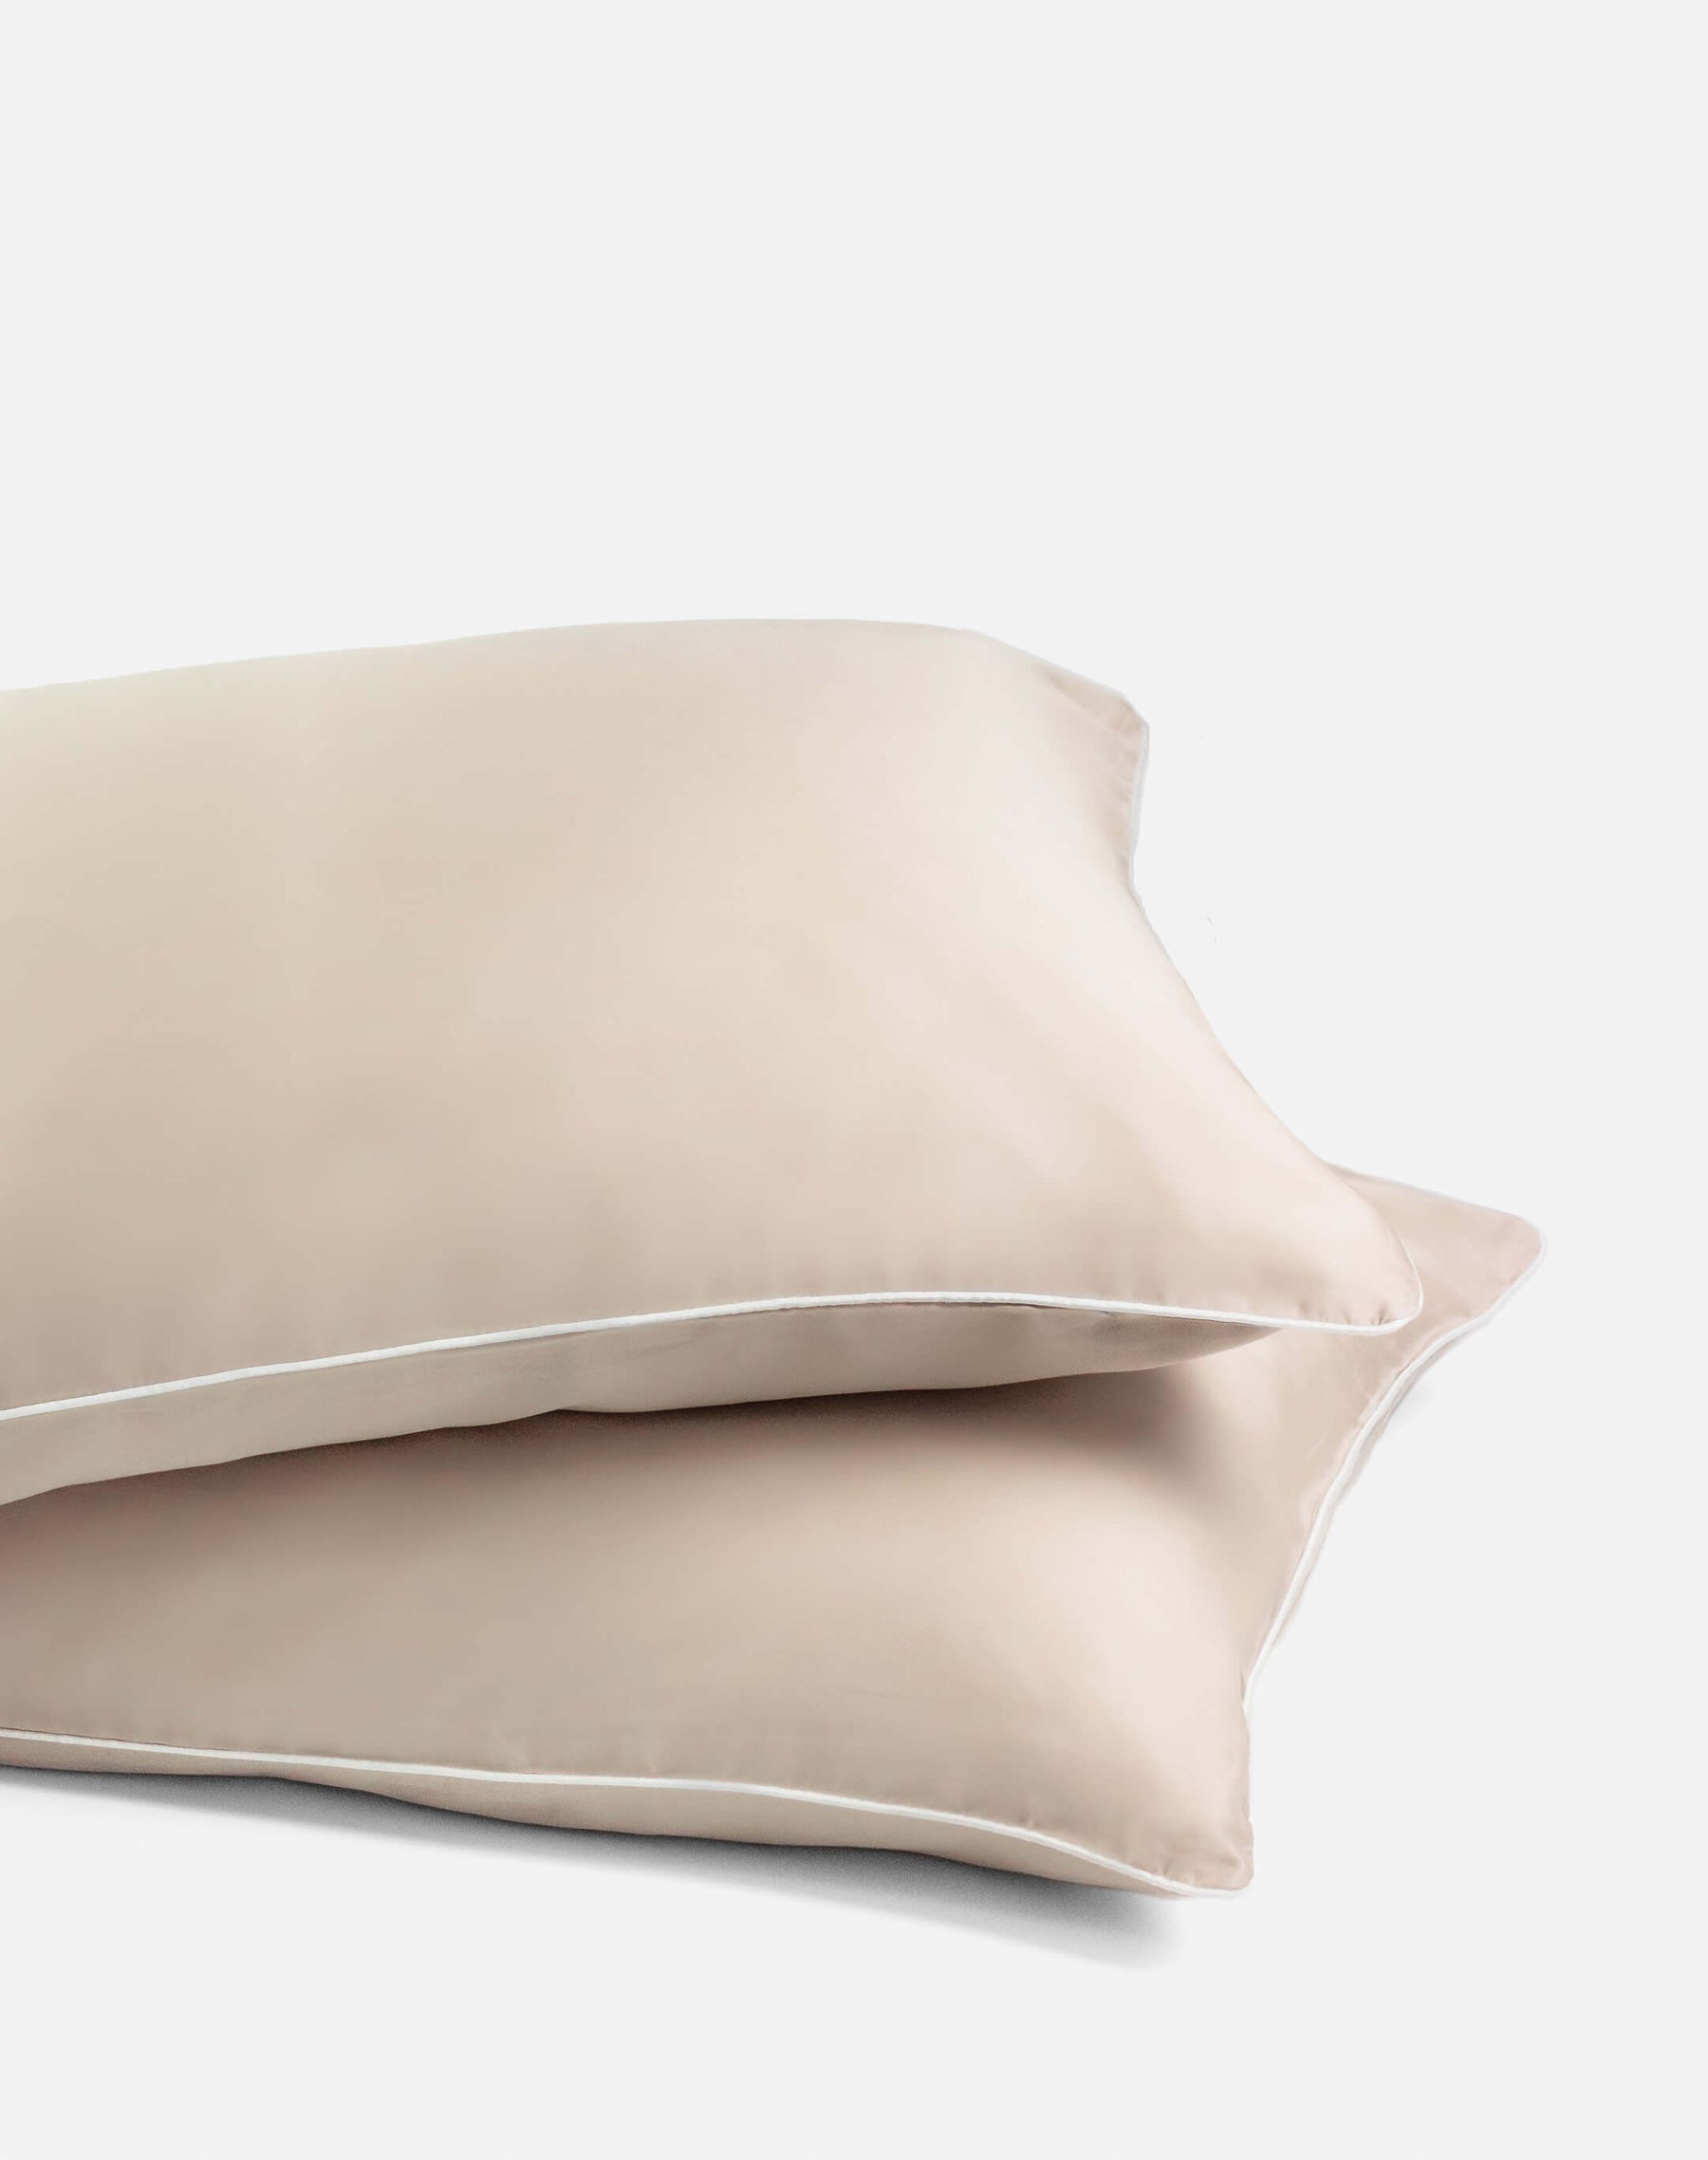 ava and ava ph organic bamboo lyocell pillowcases sand beige with white piping. vegan silk, soft, cool, smooth, breathable.